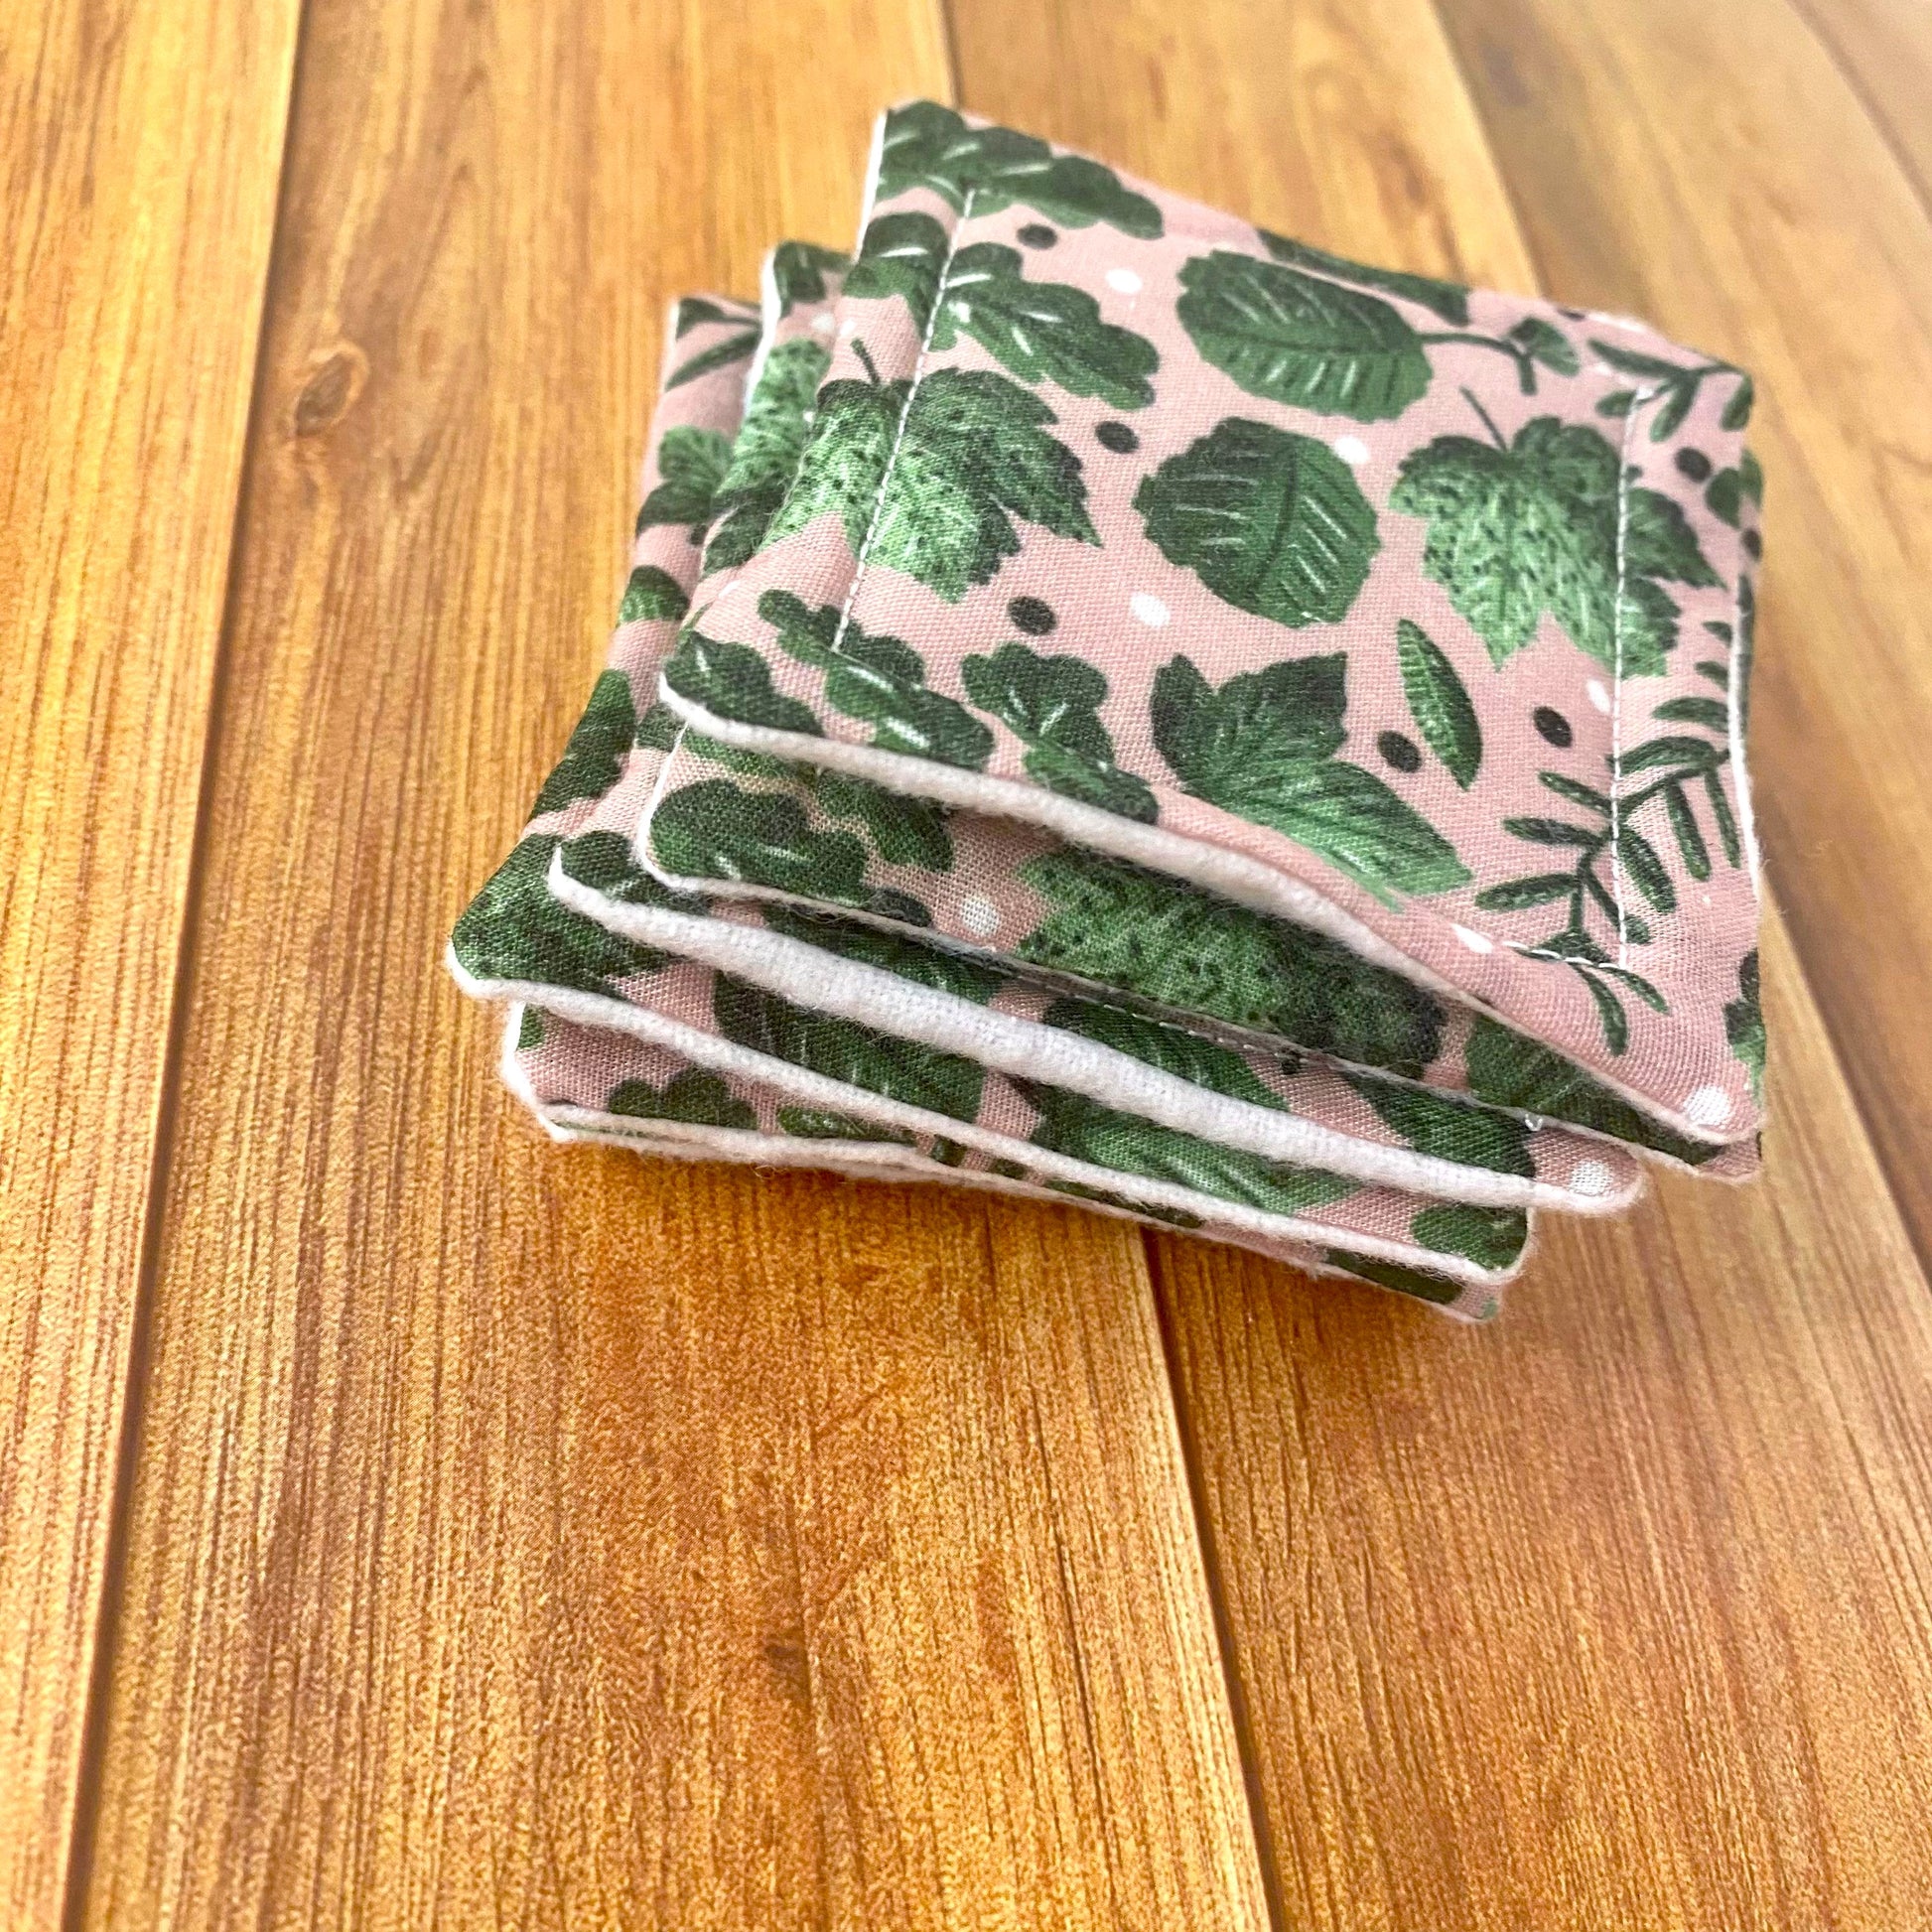 A stack of reusable skincare pads on a wooden background